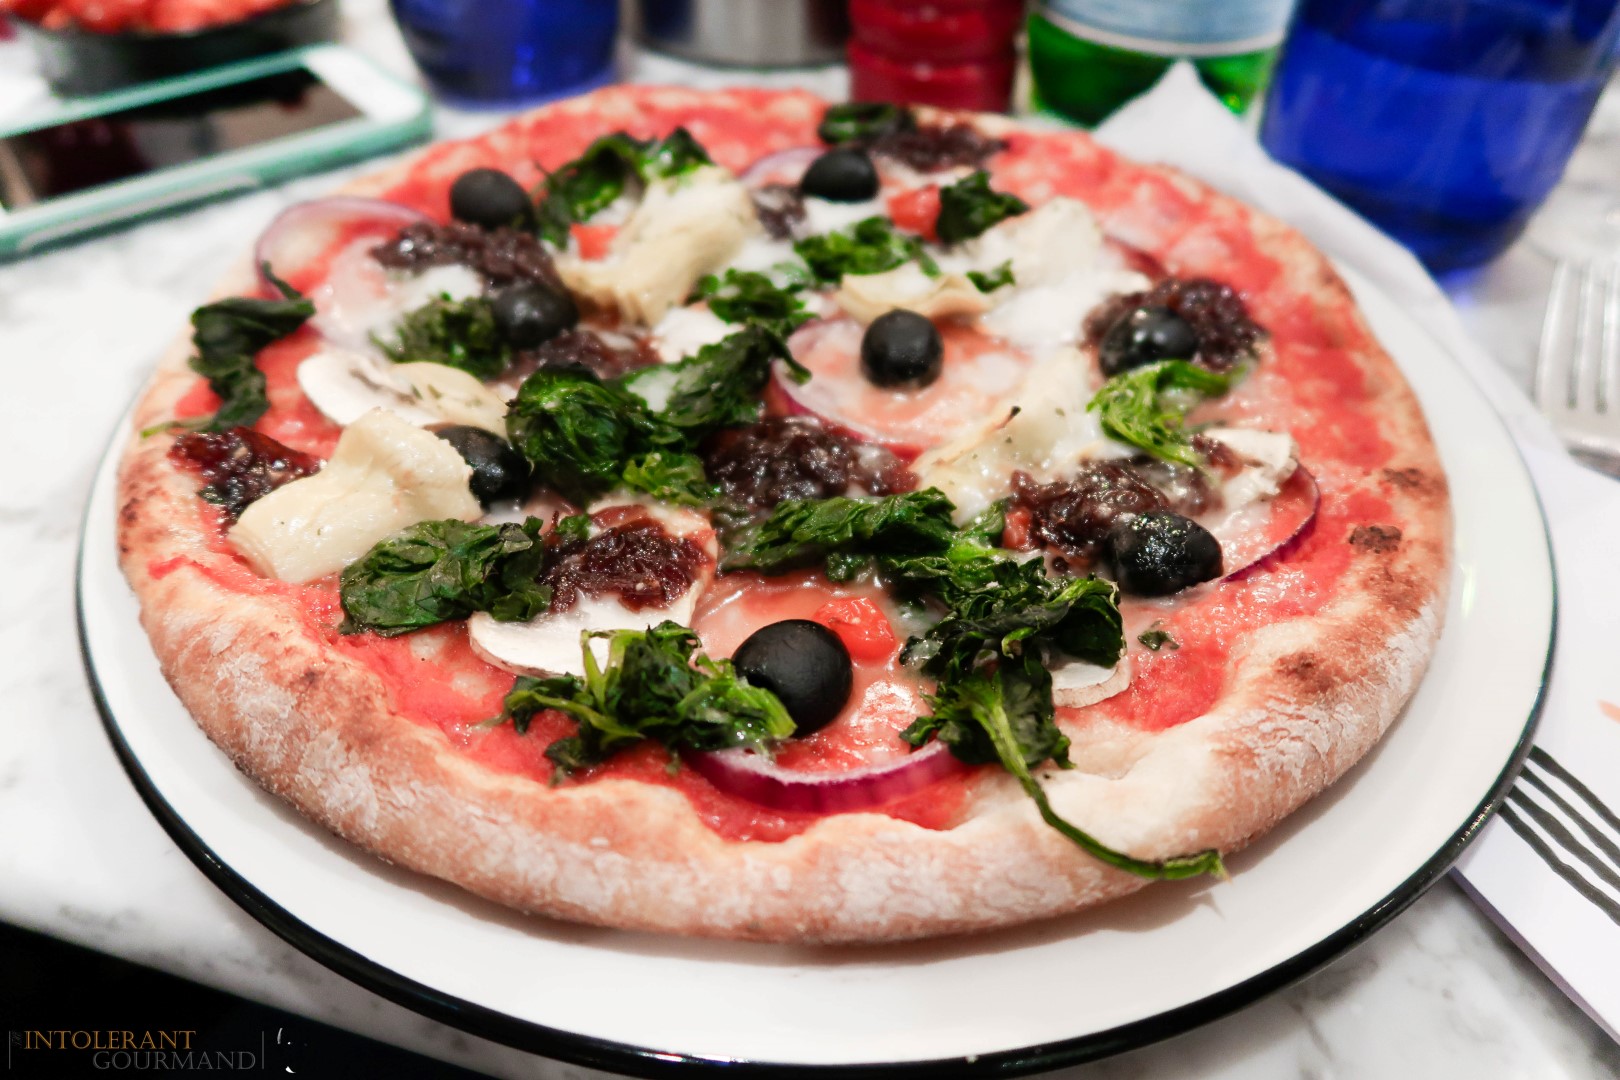 Vegan Cheese Pizza Express - The 1st vegan pizza party at Pizza Express held at their flagship venue on Gloucester Road, London! Their vegan cheese behaves in the same way as 'normal' cheese, and melts beautifully, and tastes great! www.intolerantgourmand.com